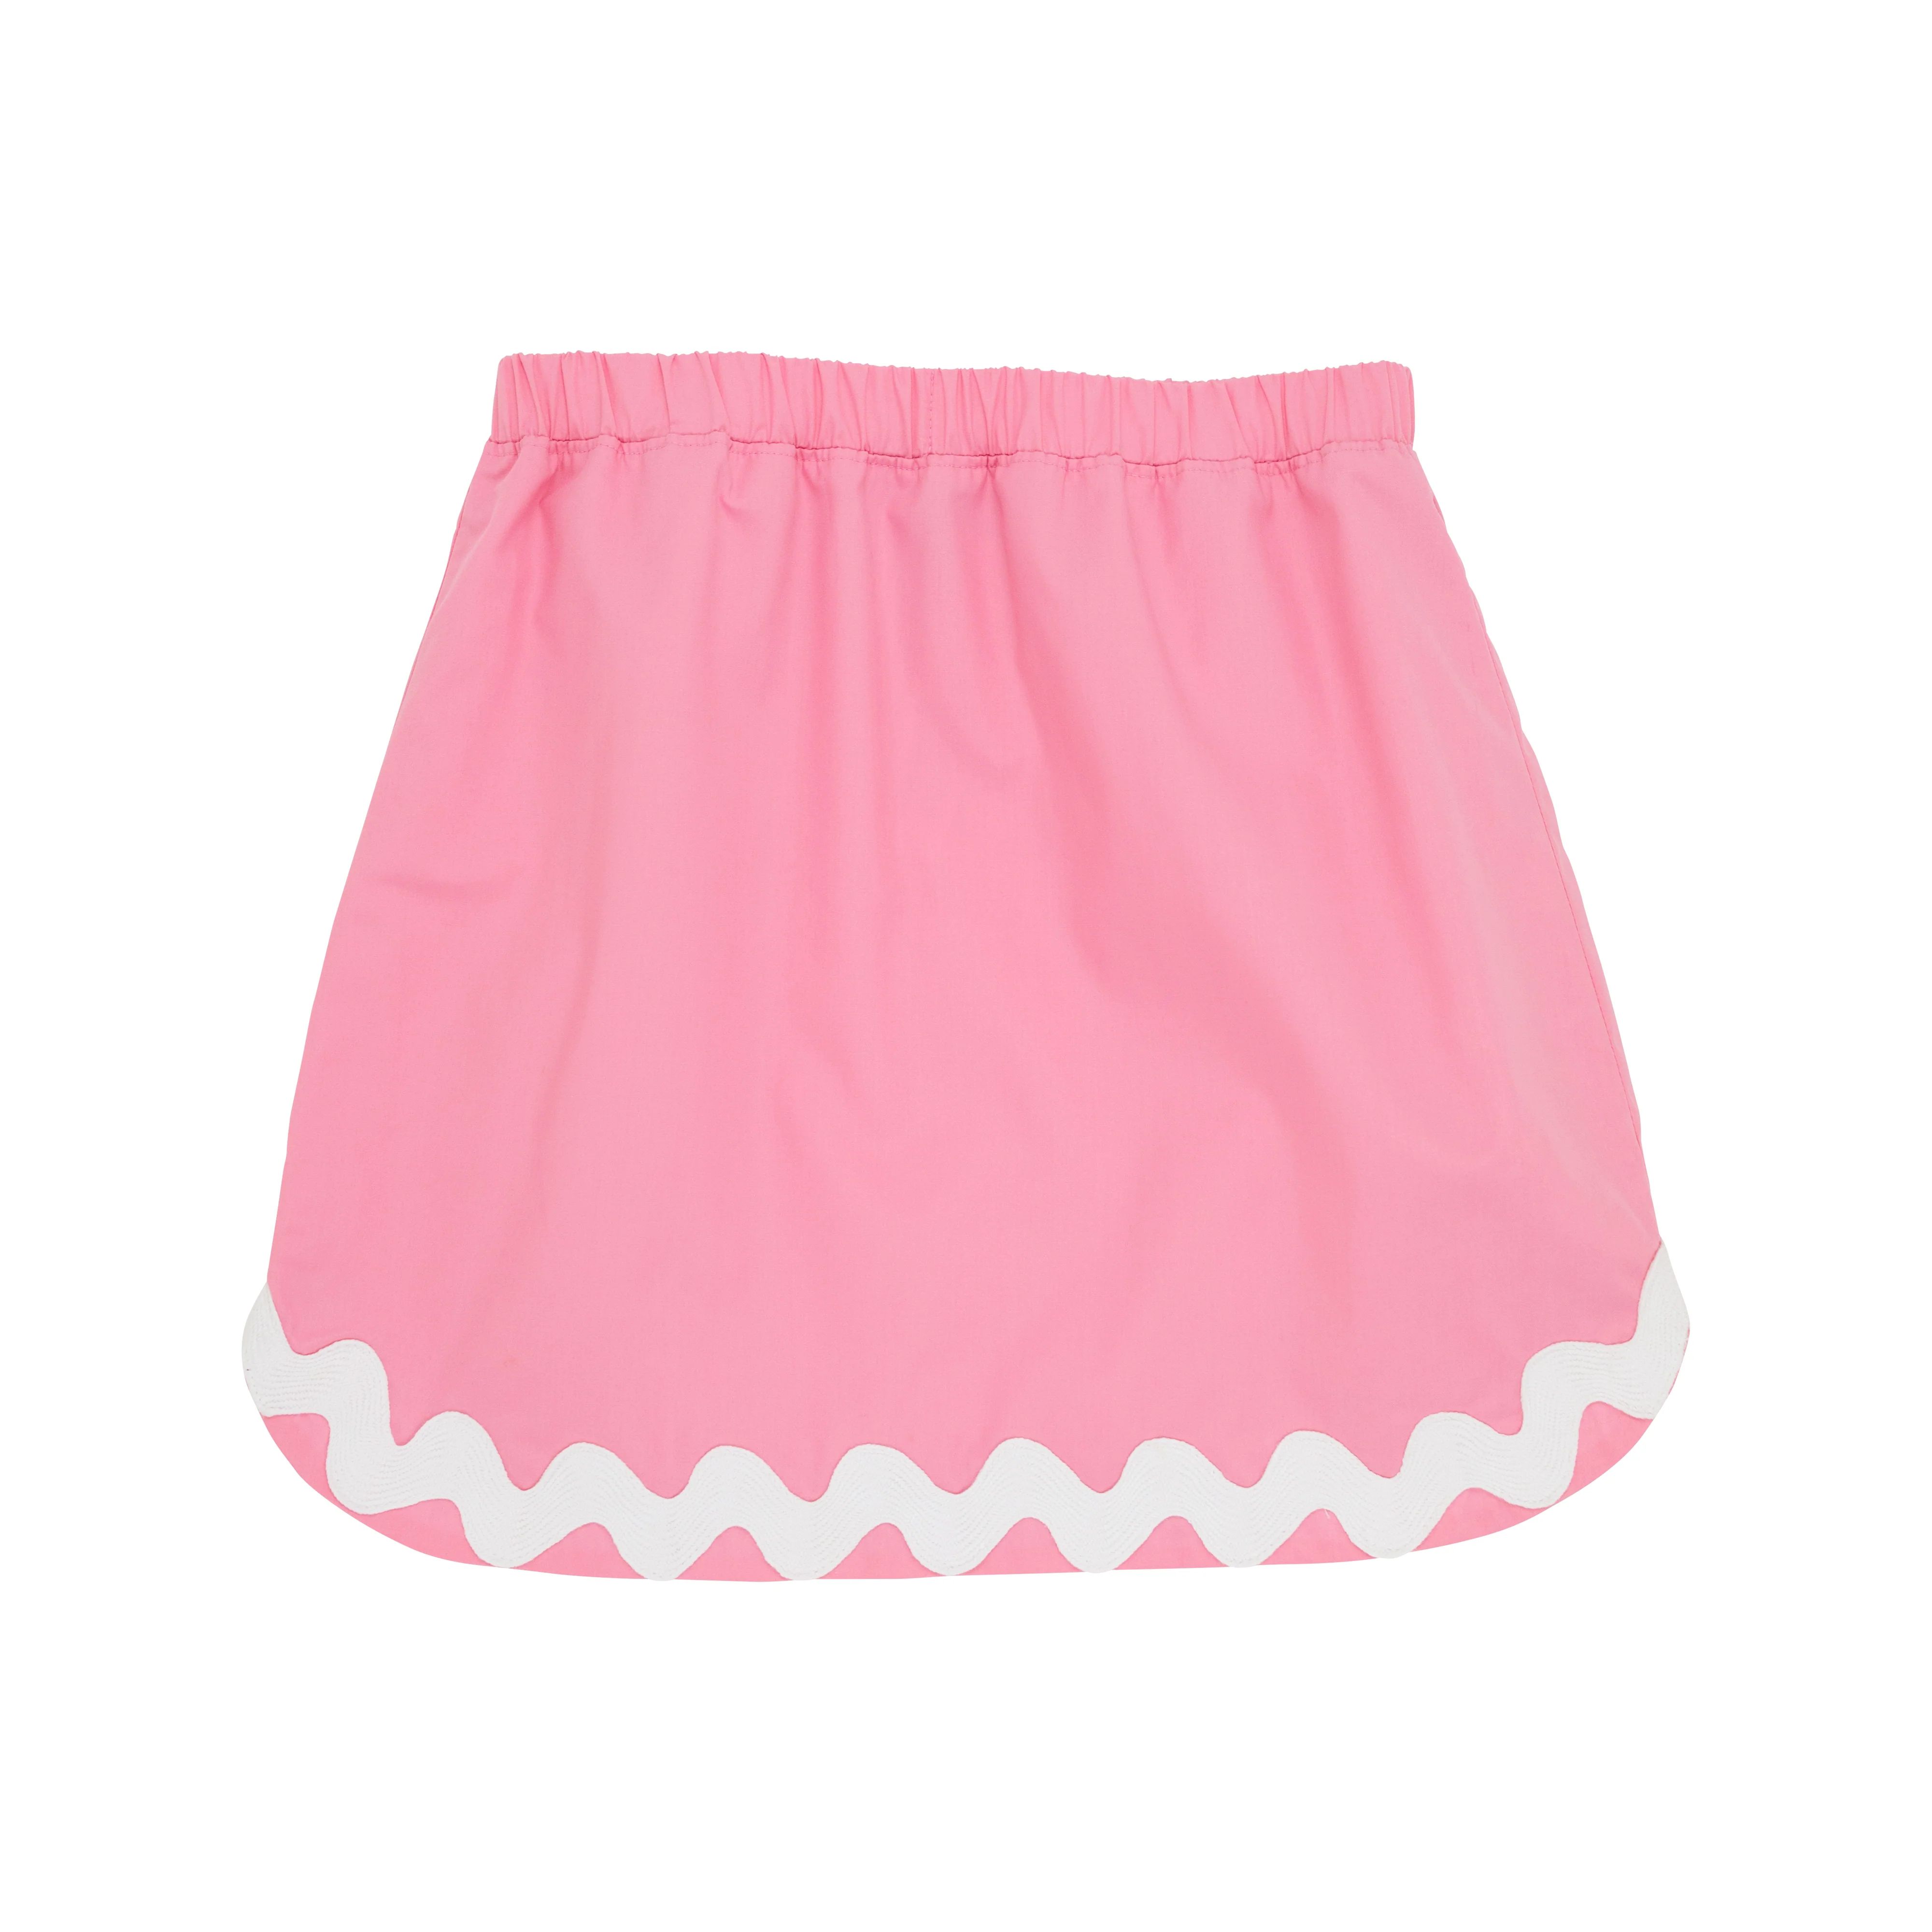 Susanne Skirt - Hamptons Hot Pink with Worth Avenue White Ric Rac | The Beaufort Bonnet Company